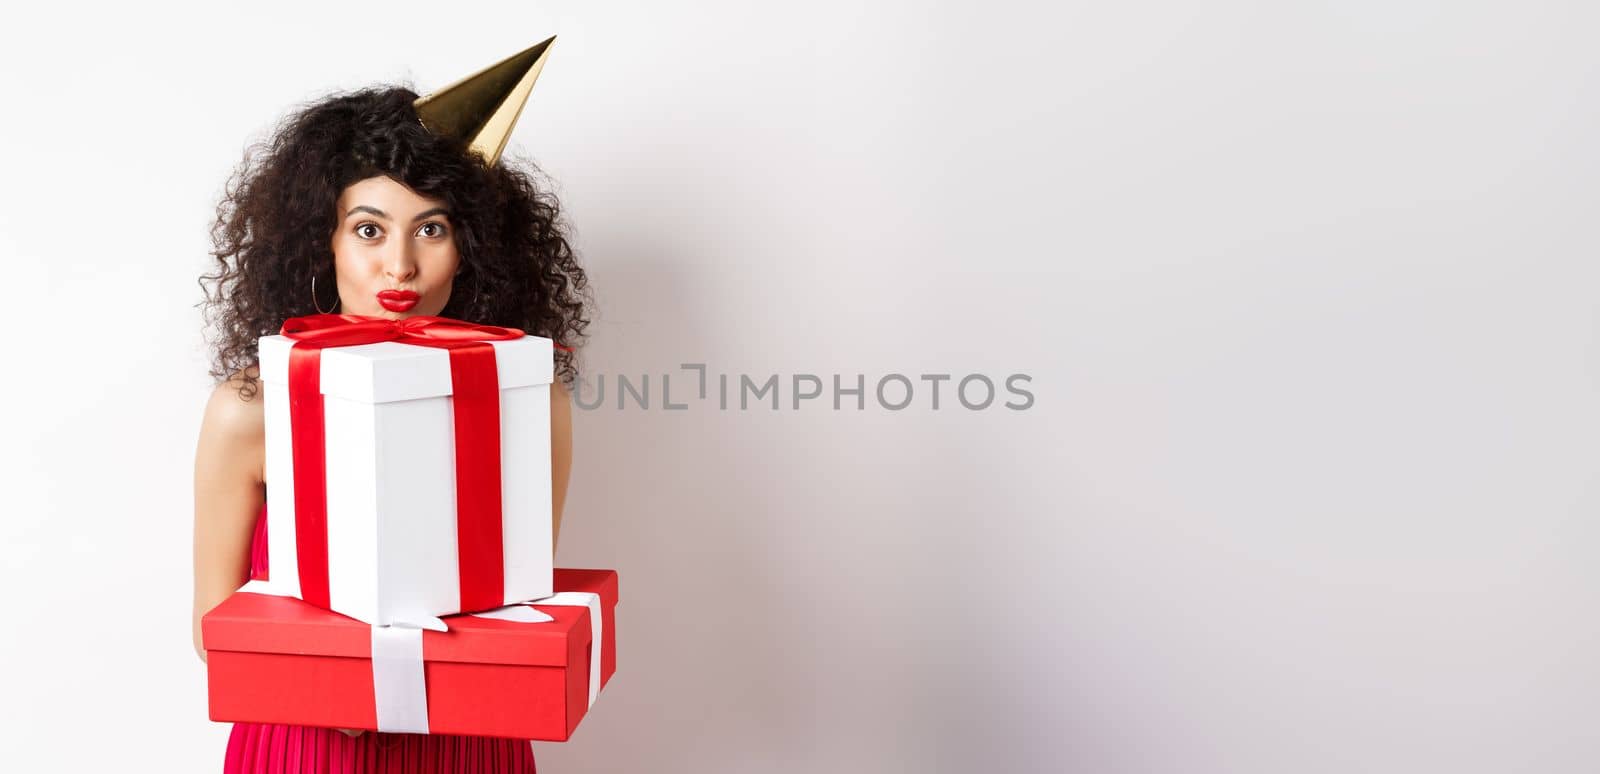 Cute birthday girl with curly hair and party hat, holding gifts and looking happy at camera, standing against white background.